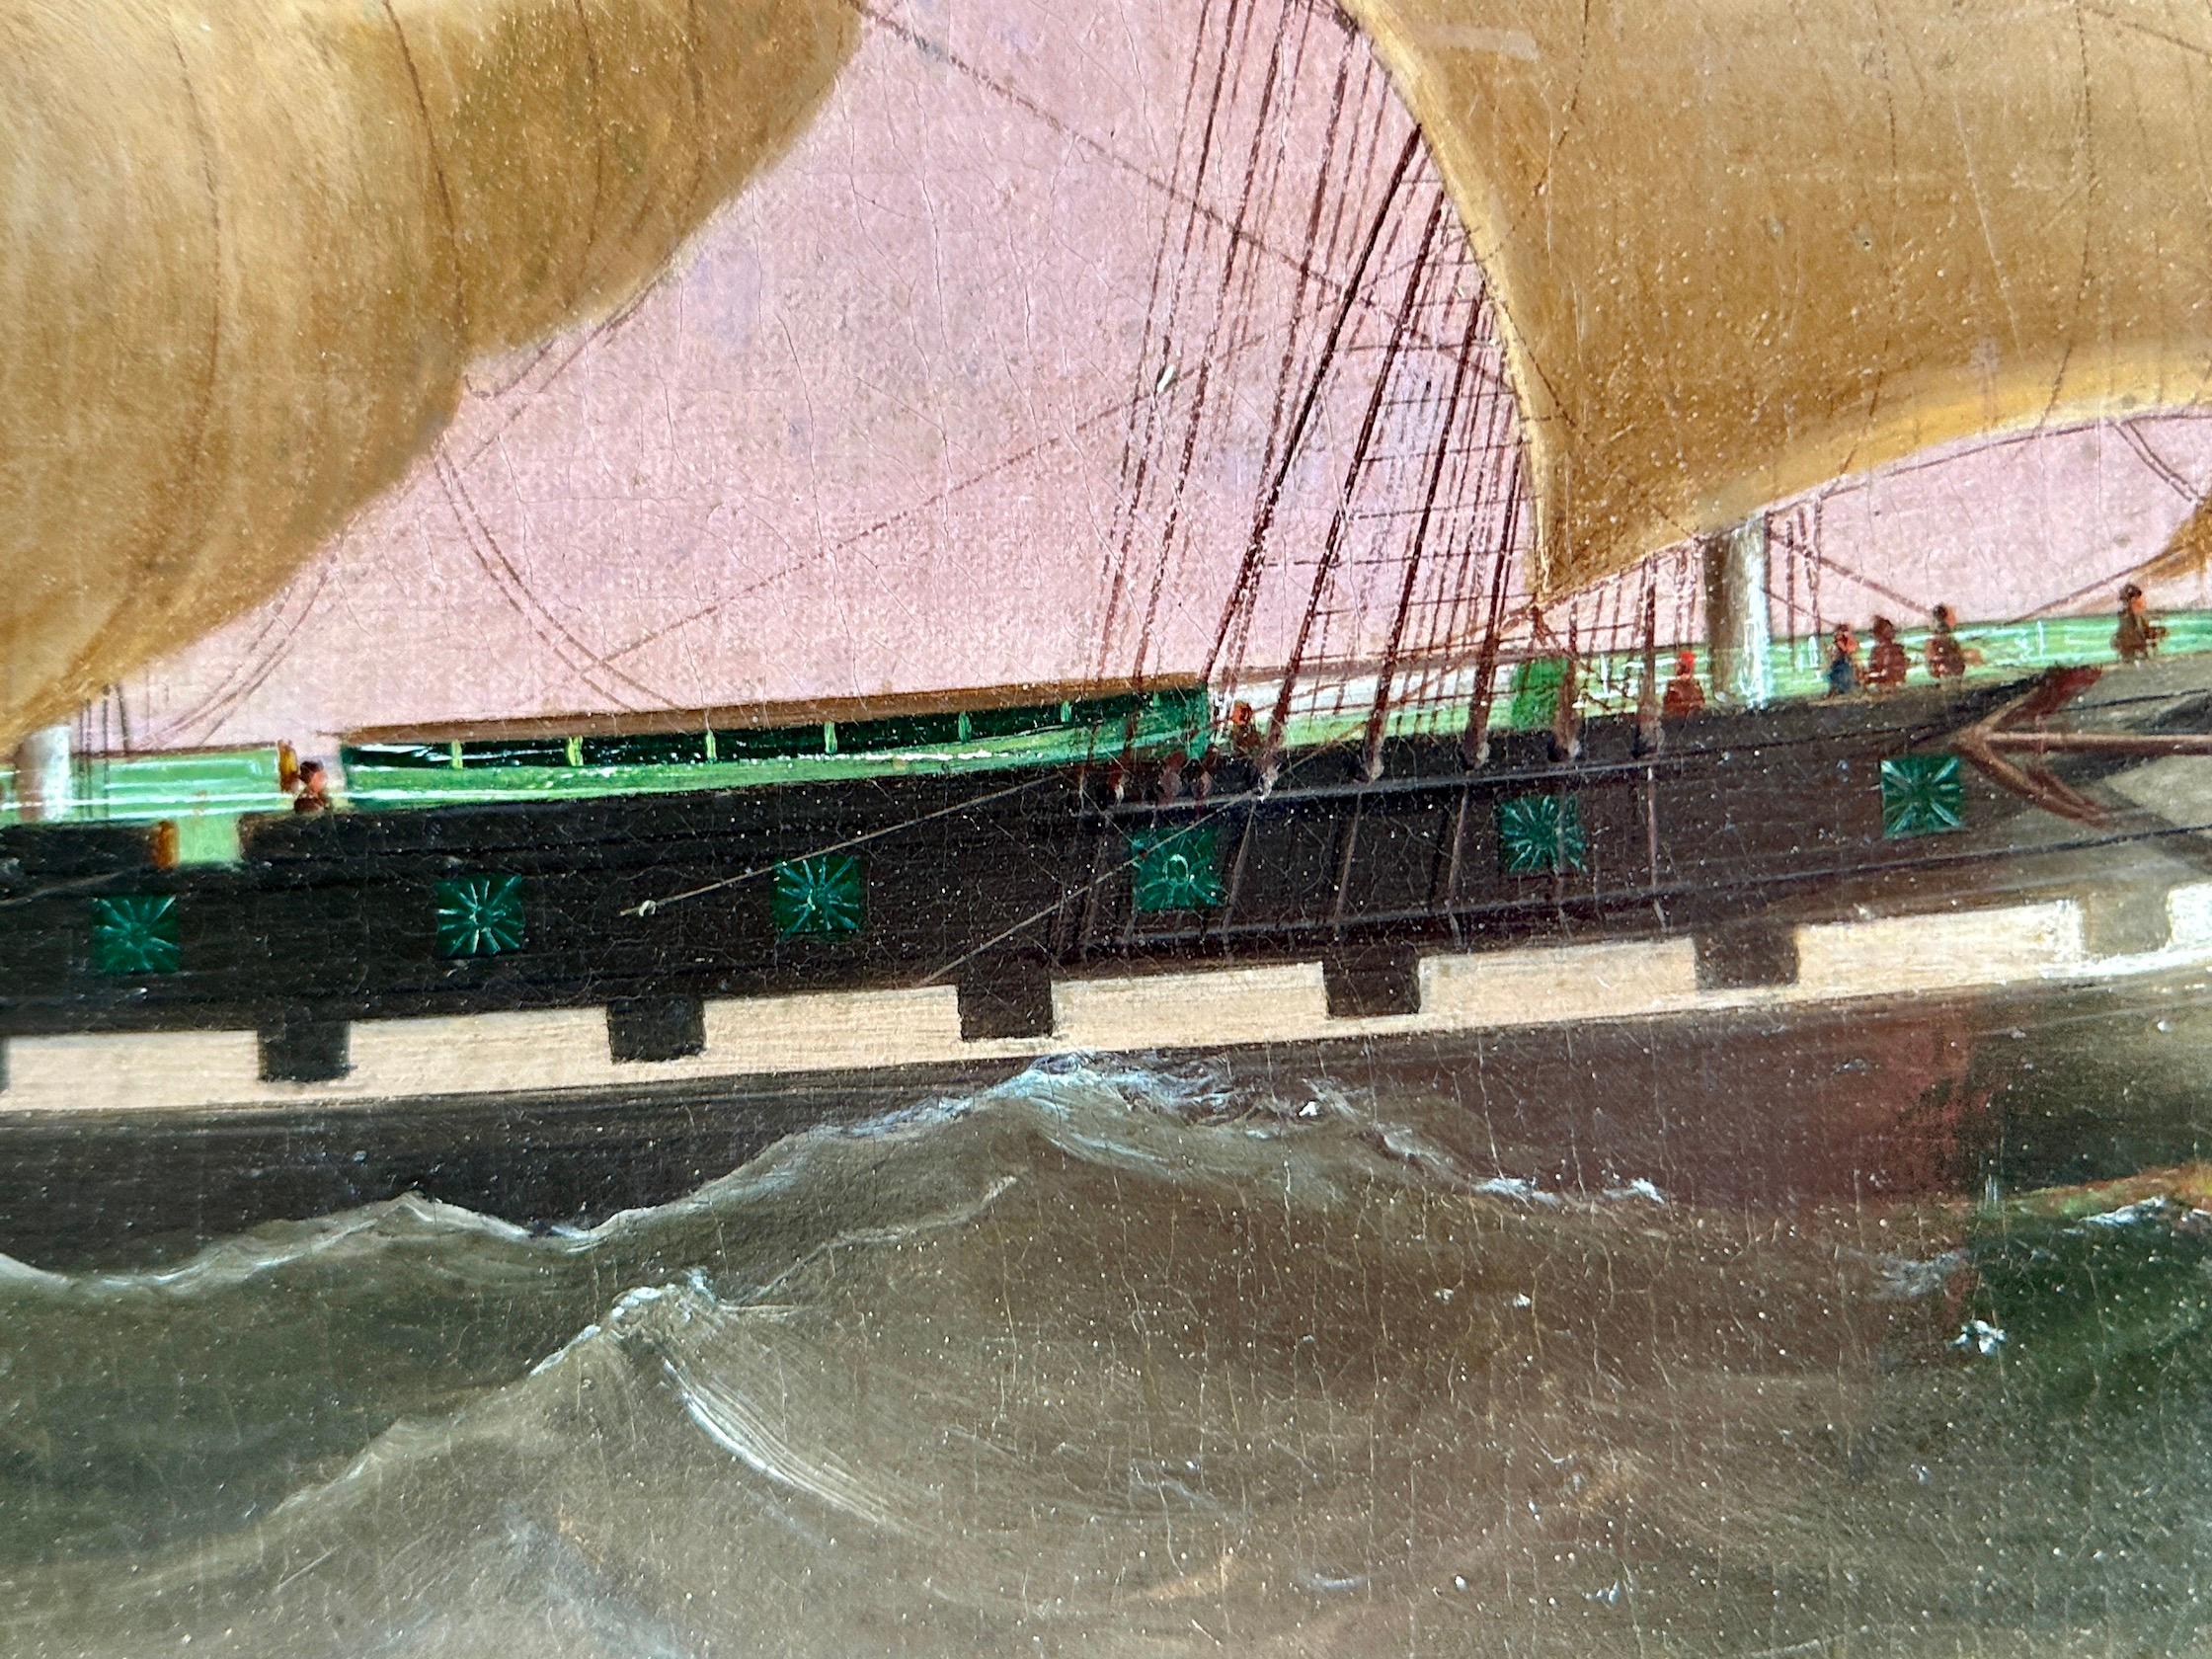 English 19th century portrait of the Clipper ship Crescent at sea in full sail For Sale 7